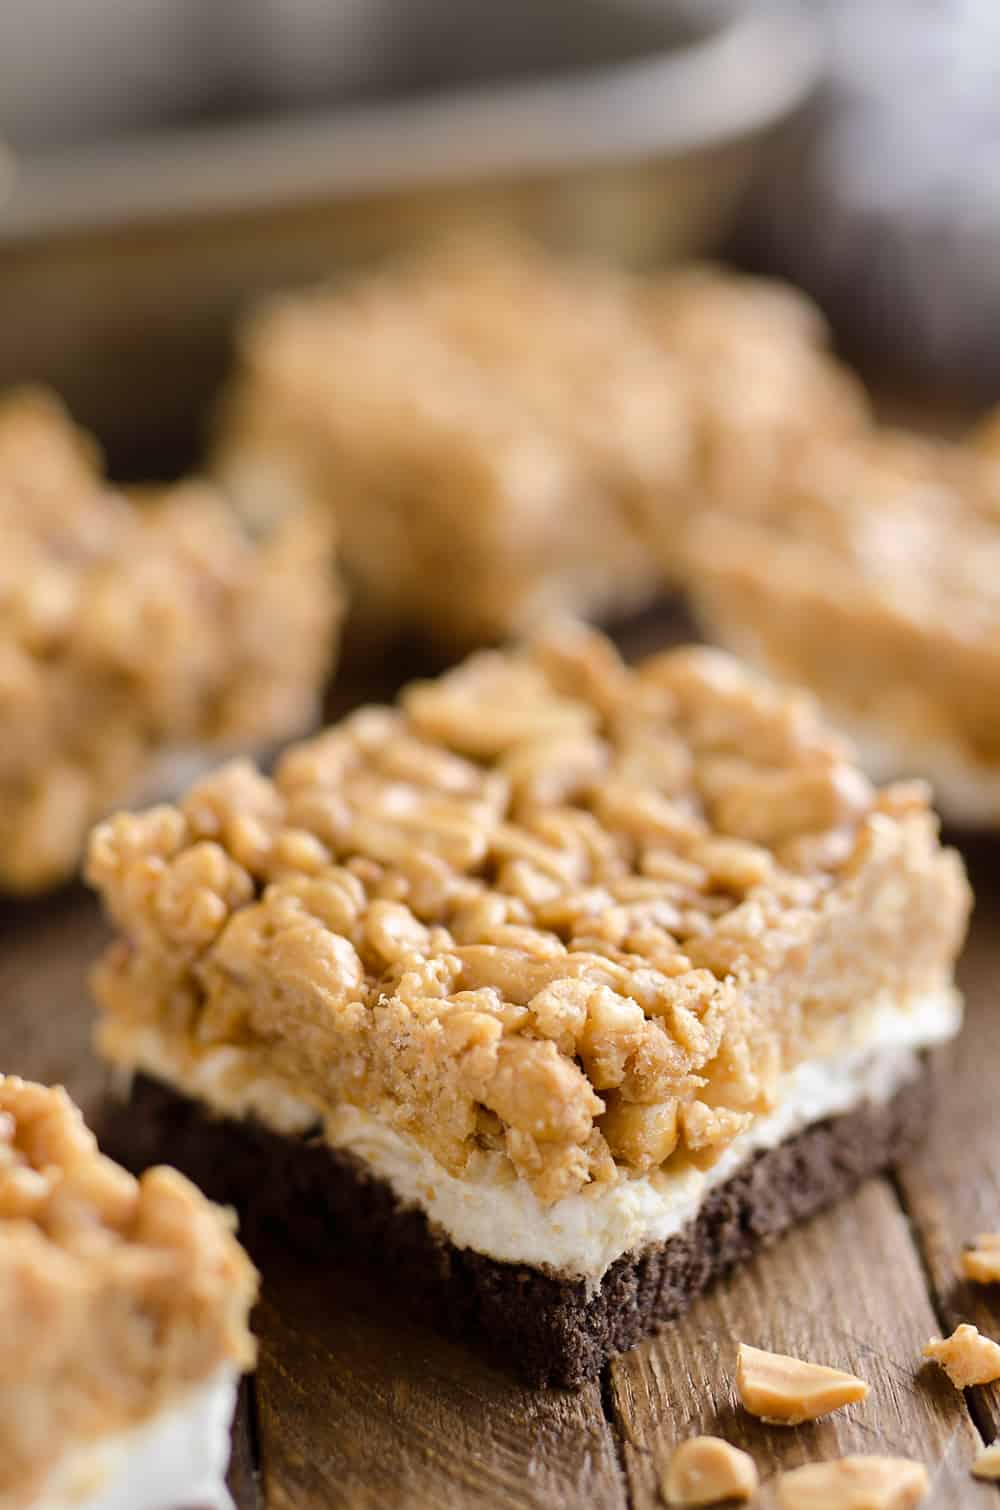 Crunchy Peanut Butter Marshmallow Bars are a sweet and salty dessert everyone will love! A chocolate crust is topped with marshmallows and a crunchy peanut butter and rice crispie mixture for a delicious treat. 